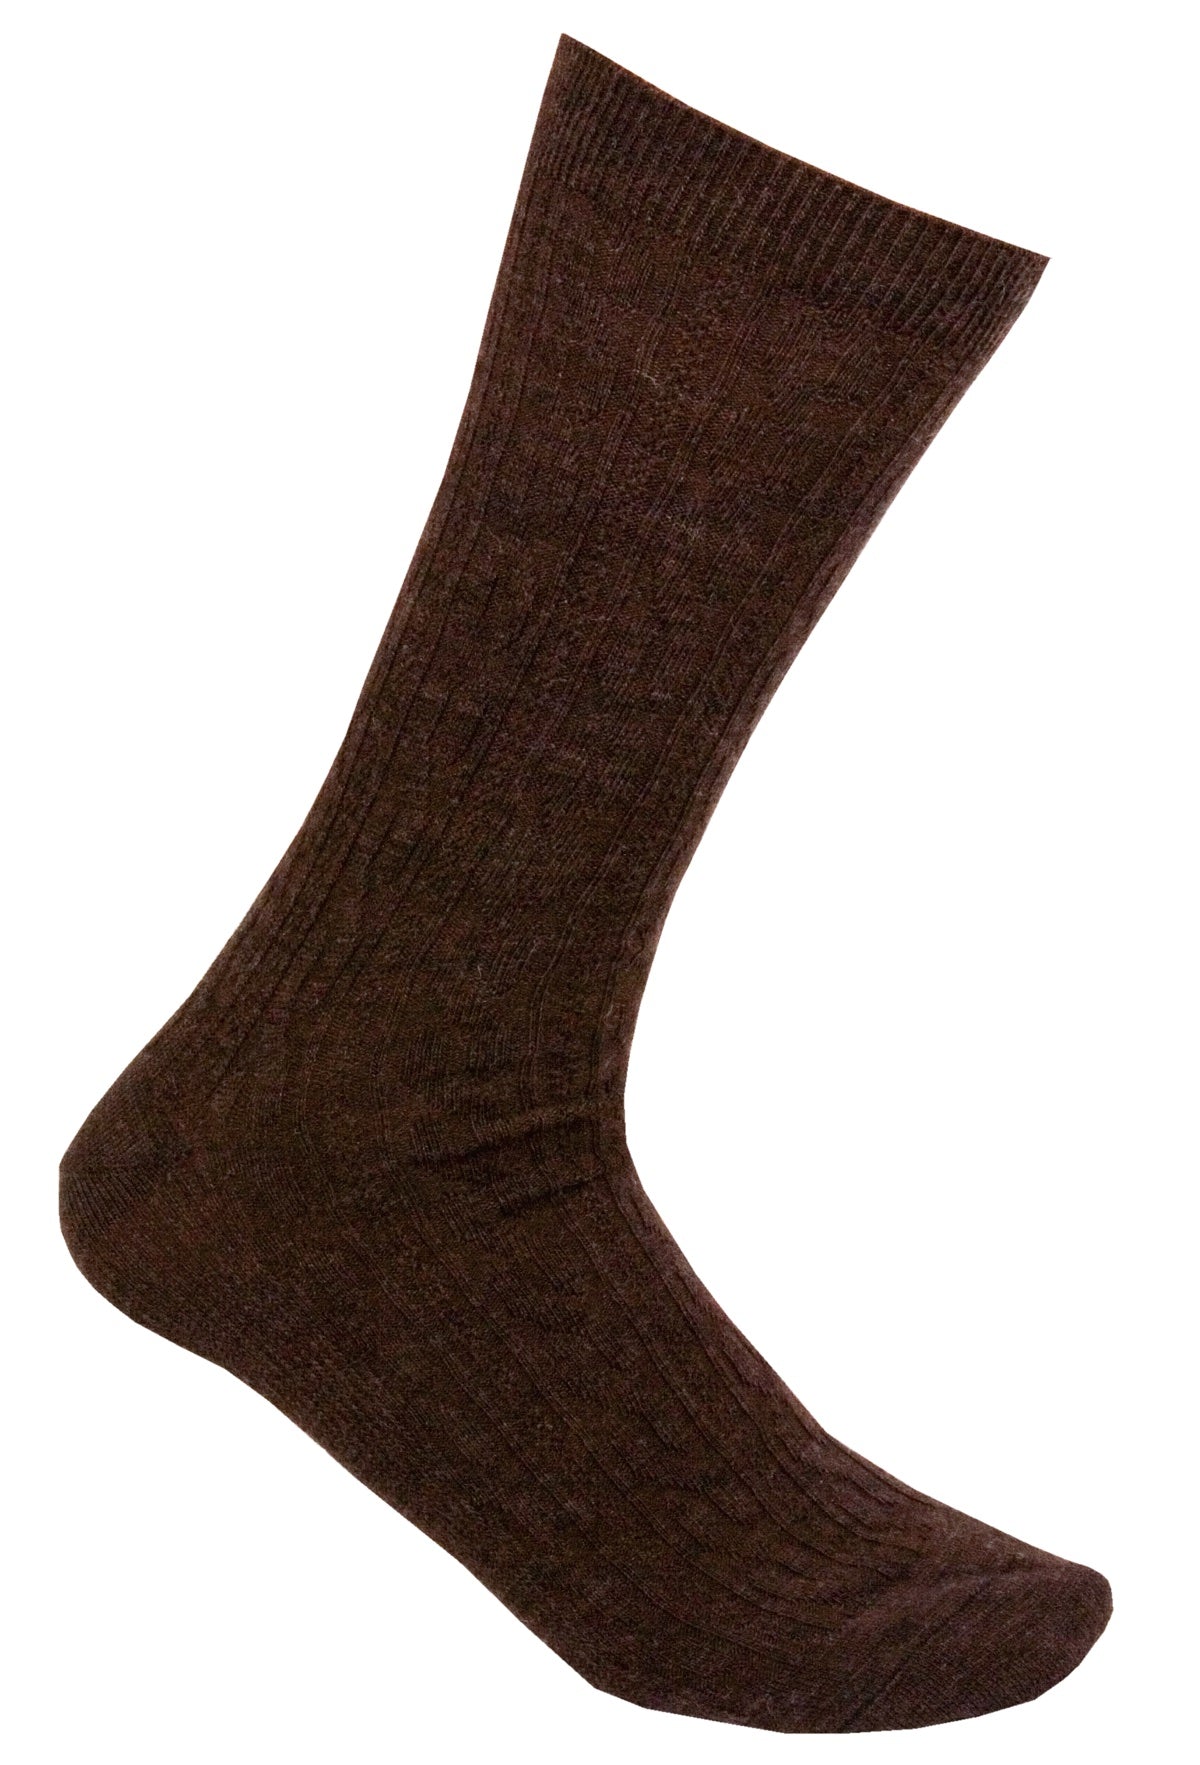 Smartwool Women's Everyday Cable Crew chestnut heather